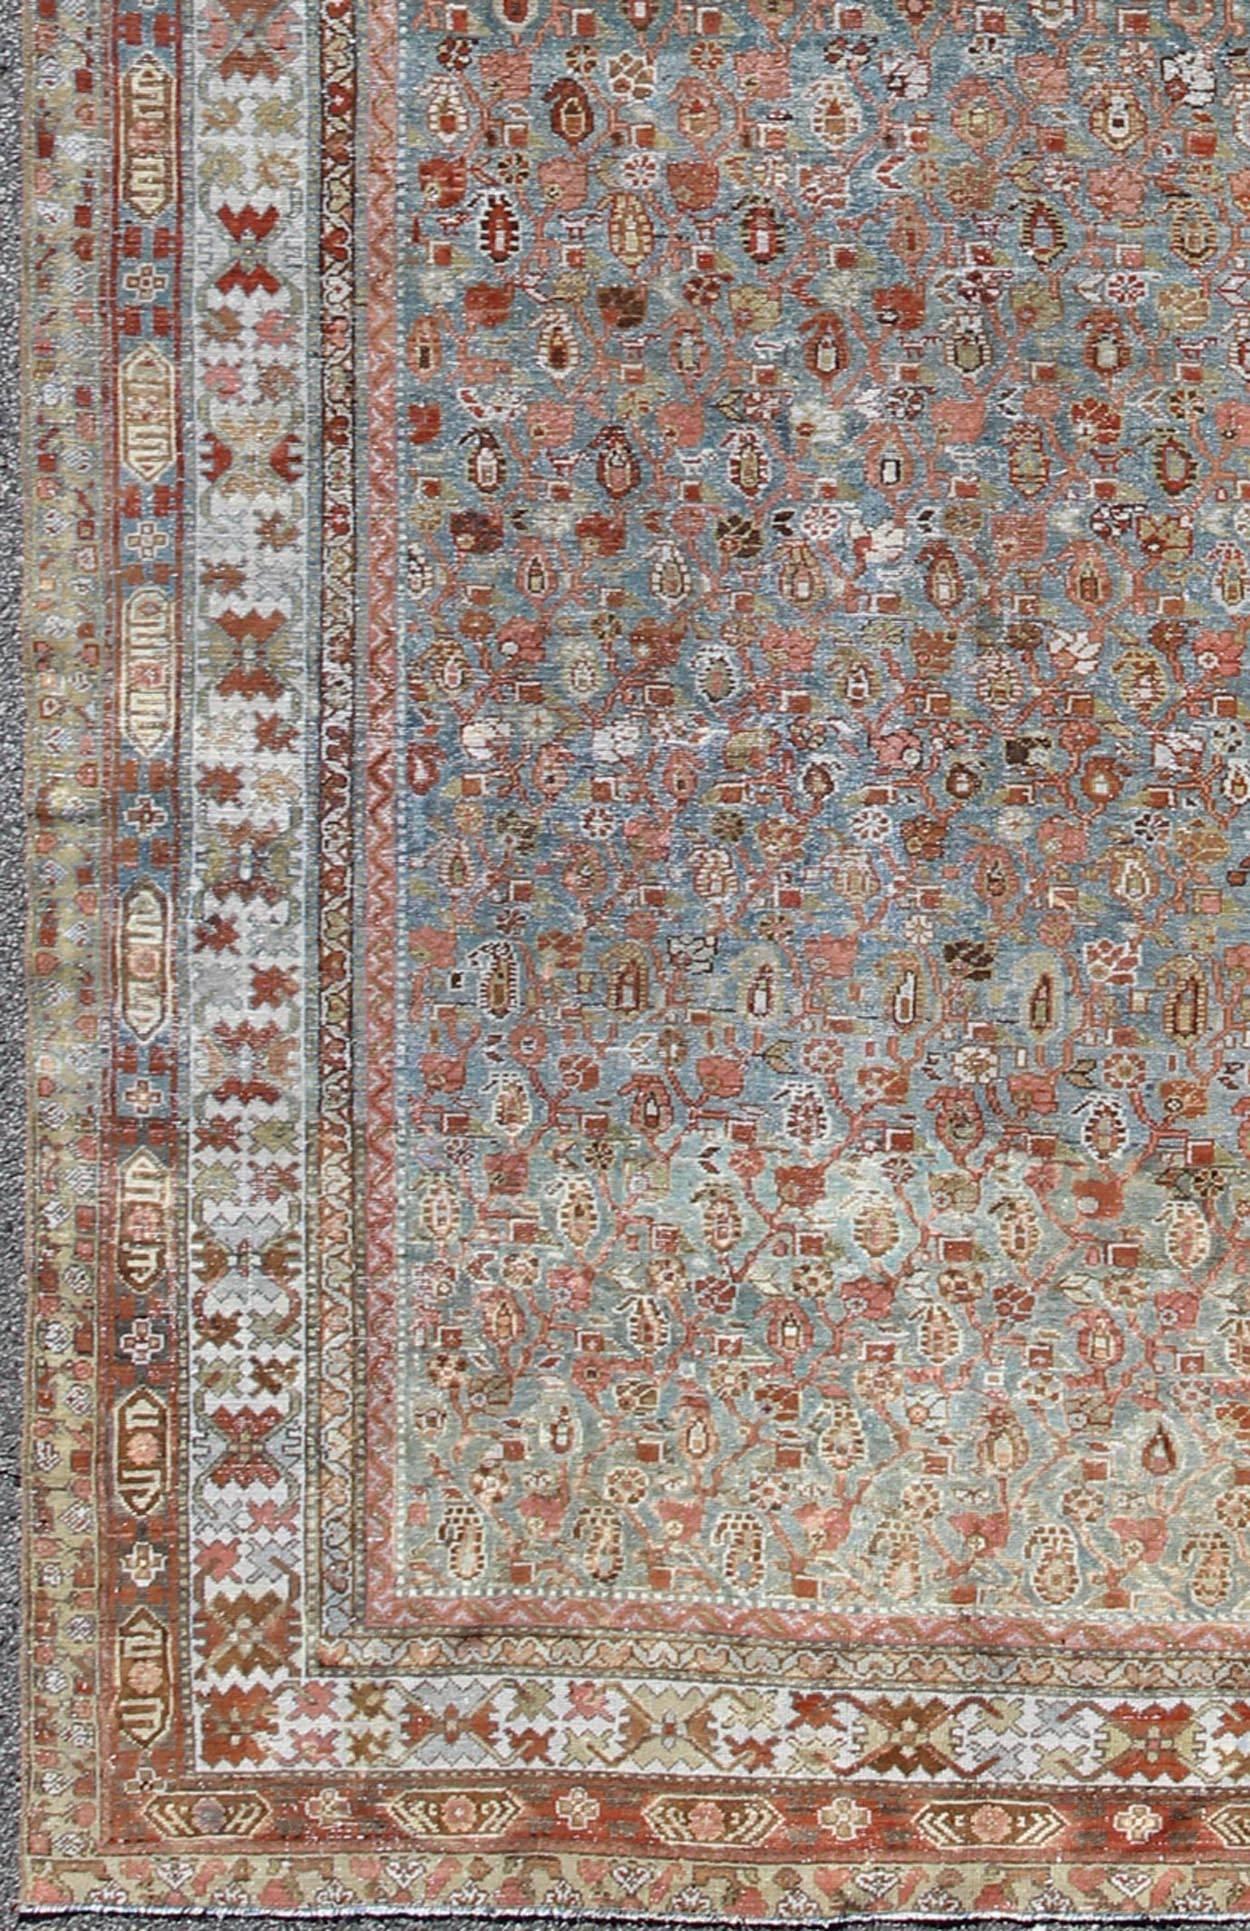 Red and Blue Antique Persian Malayer Rug with All-Over Design and Ornate Borders, rug sus-4704, country of origin / type: Iran / Malayer, circa 1910

This antique Persian Malayer rug was handwoven in the early 20th century (circa 1910) and bears a